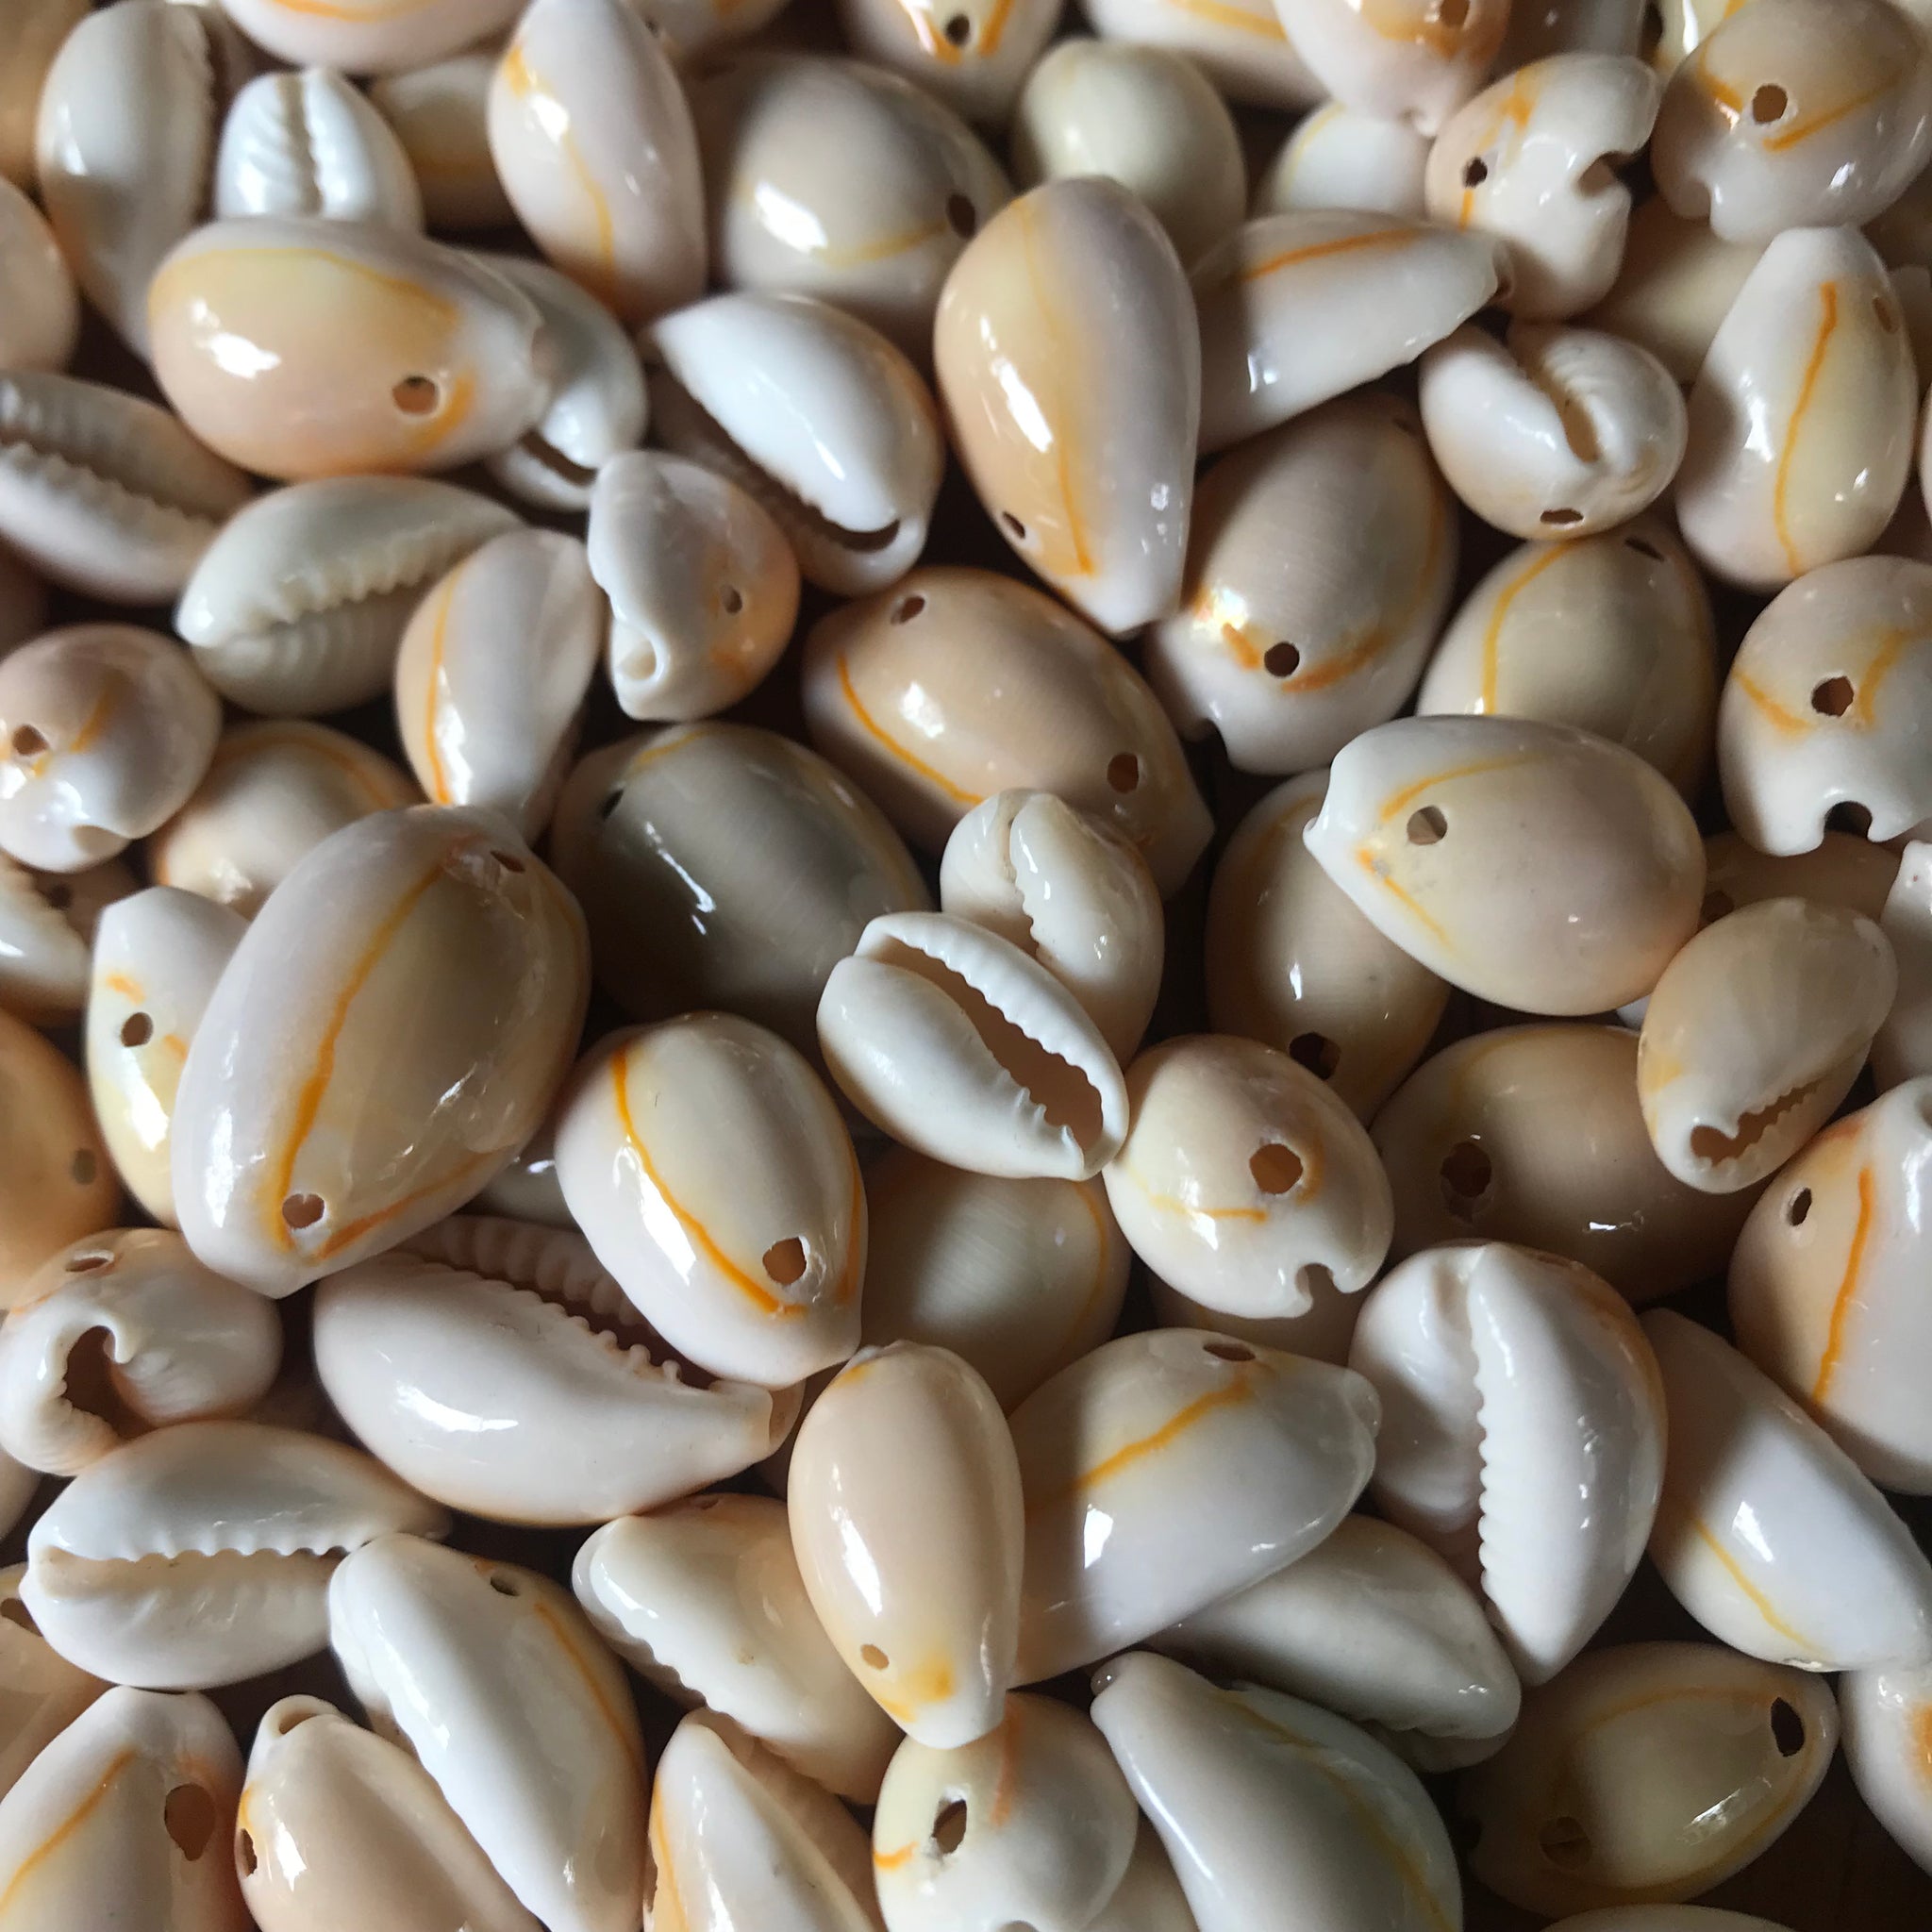 160pcs+ 100g – 13-20mm - Two-Hole Cowrie Shells - Perfect